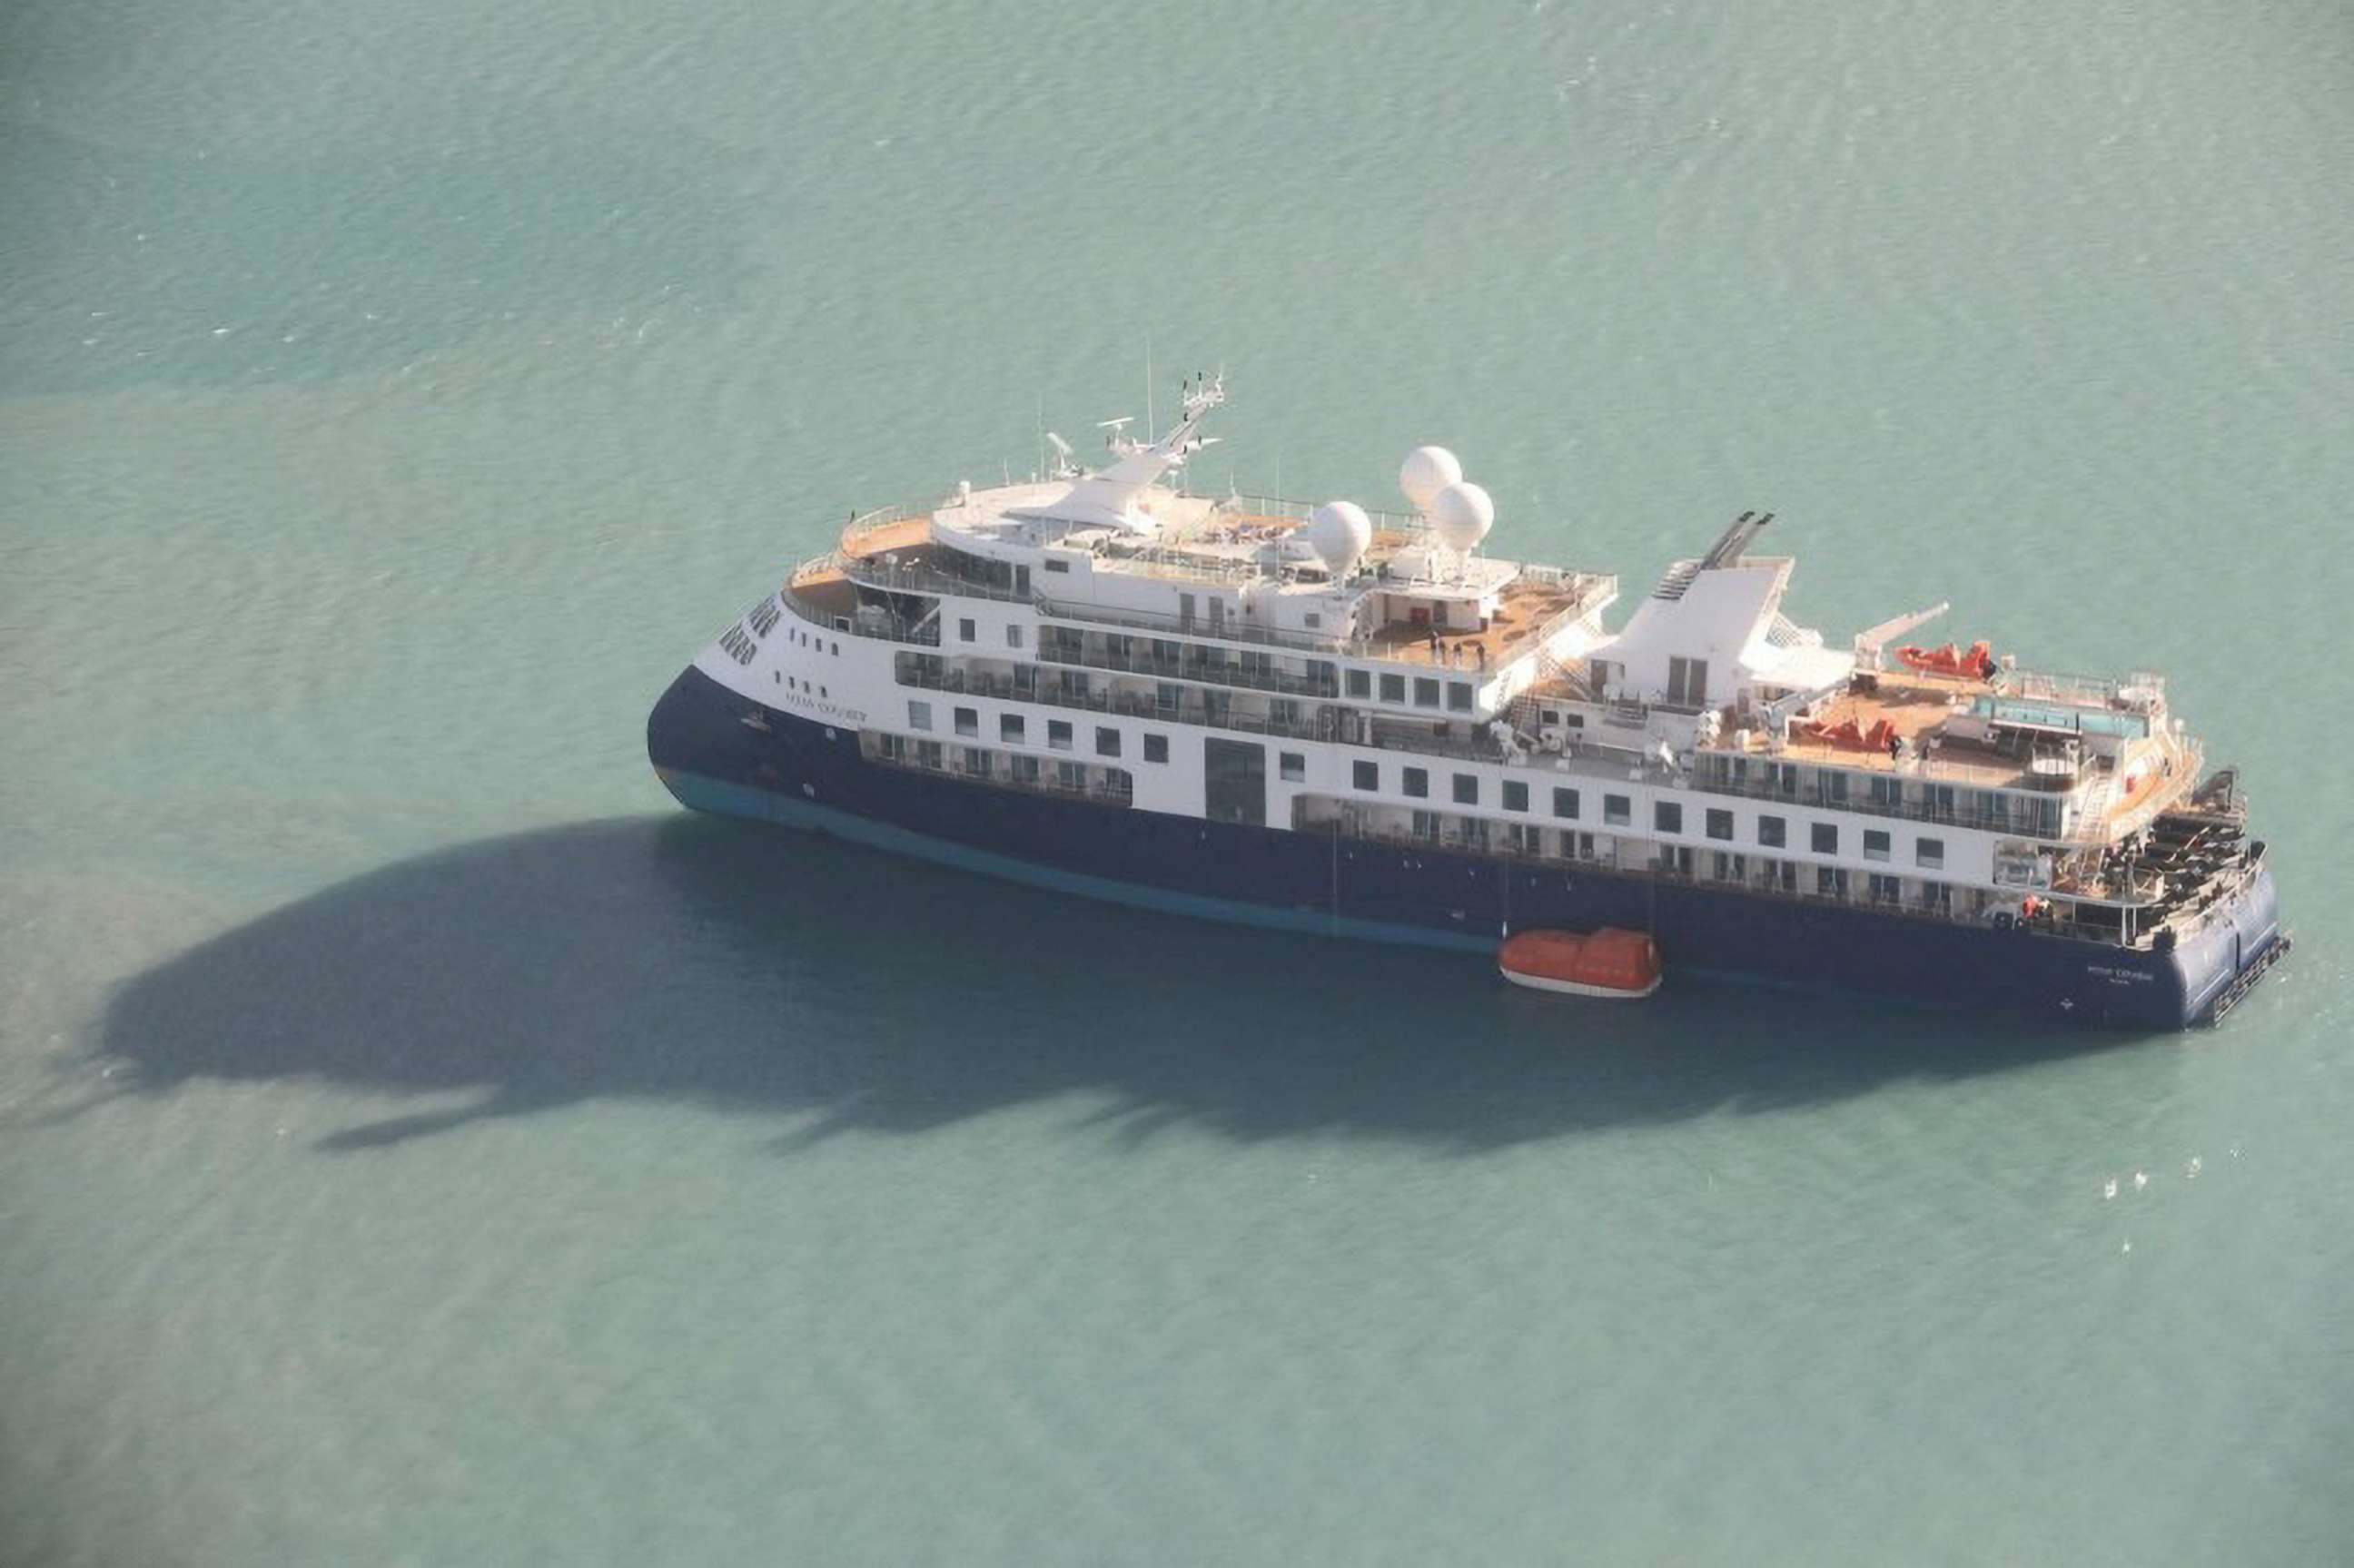 PHOTO: View of the Ocean Explorer, a luxury cruise ship carrying 206 people that ran aground, in Alpefjord, Greenland, Sept. 12, 2023.